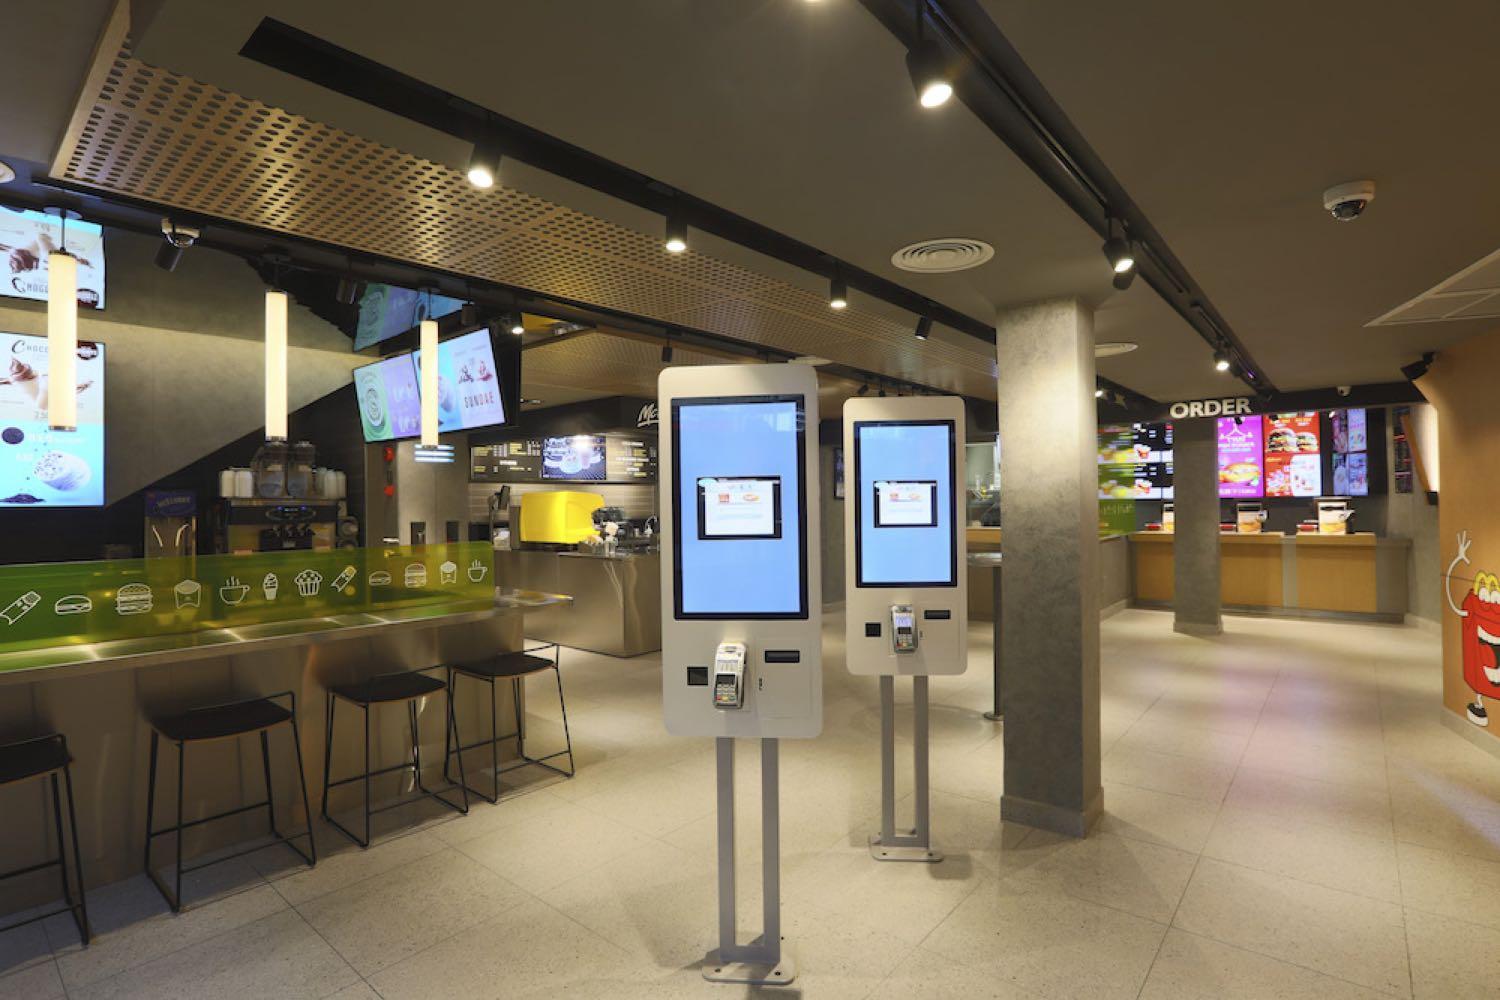 McDonald's Bukit Bintang Just Unveiled a New Modern Look and Netizens Are Lovin' It! - WORLD OF BUZZ 6